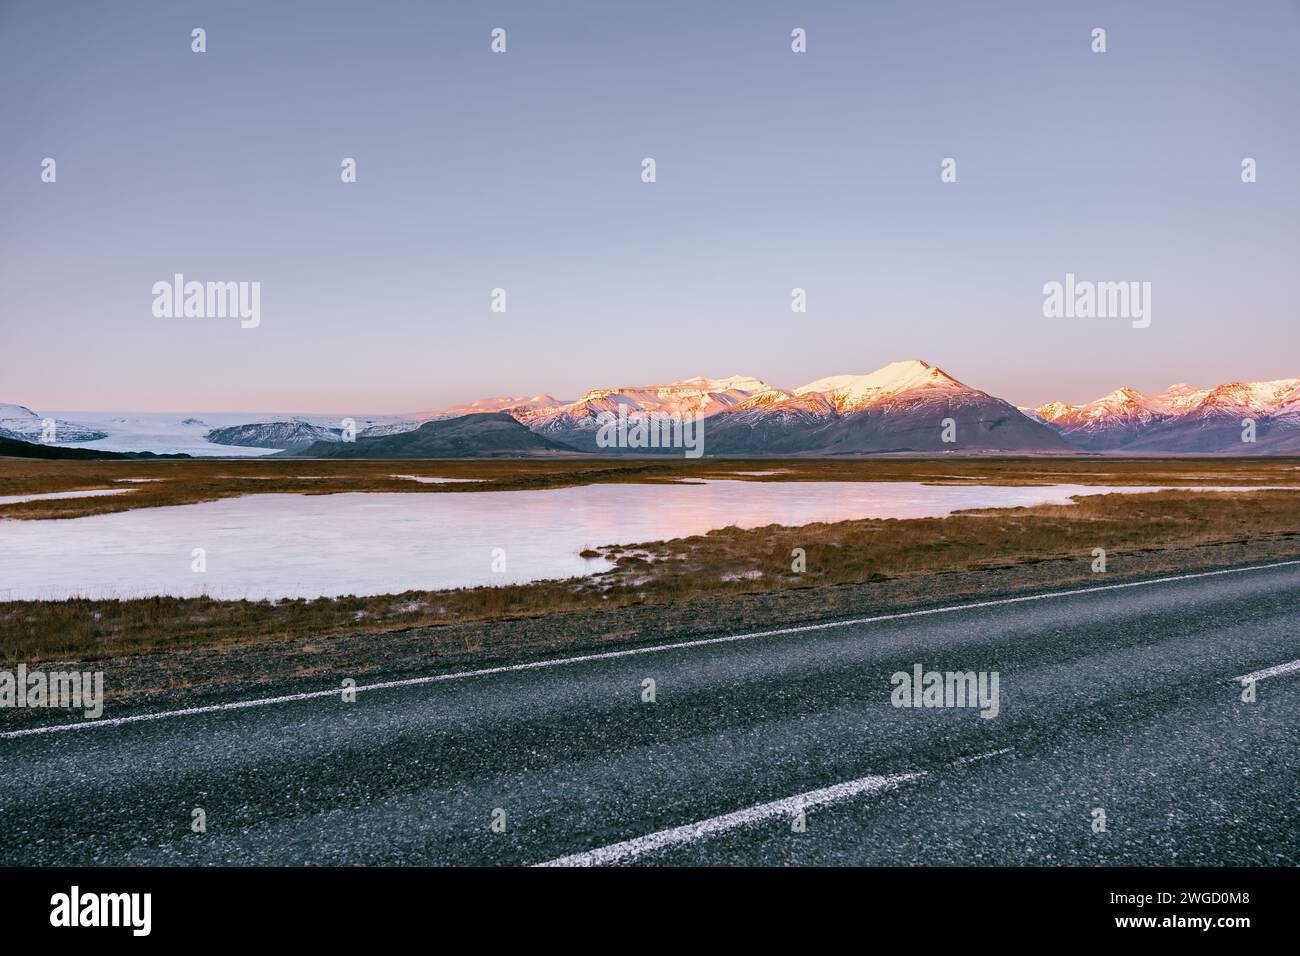 A landscape photo of southern Iceland with mountains and snow in the background, lots of ice in the foreground during sunset with a blue sky Stock Photo